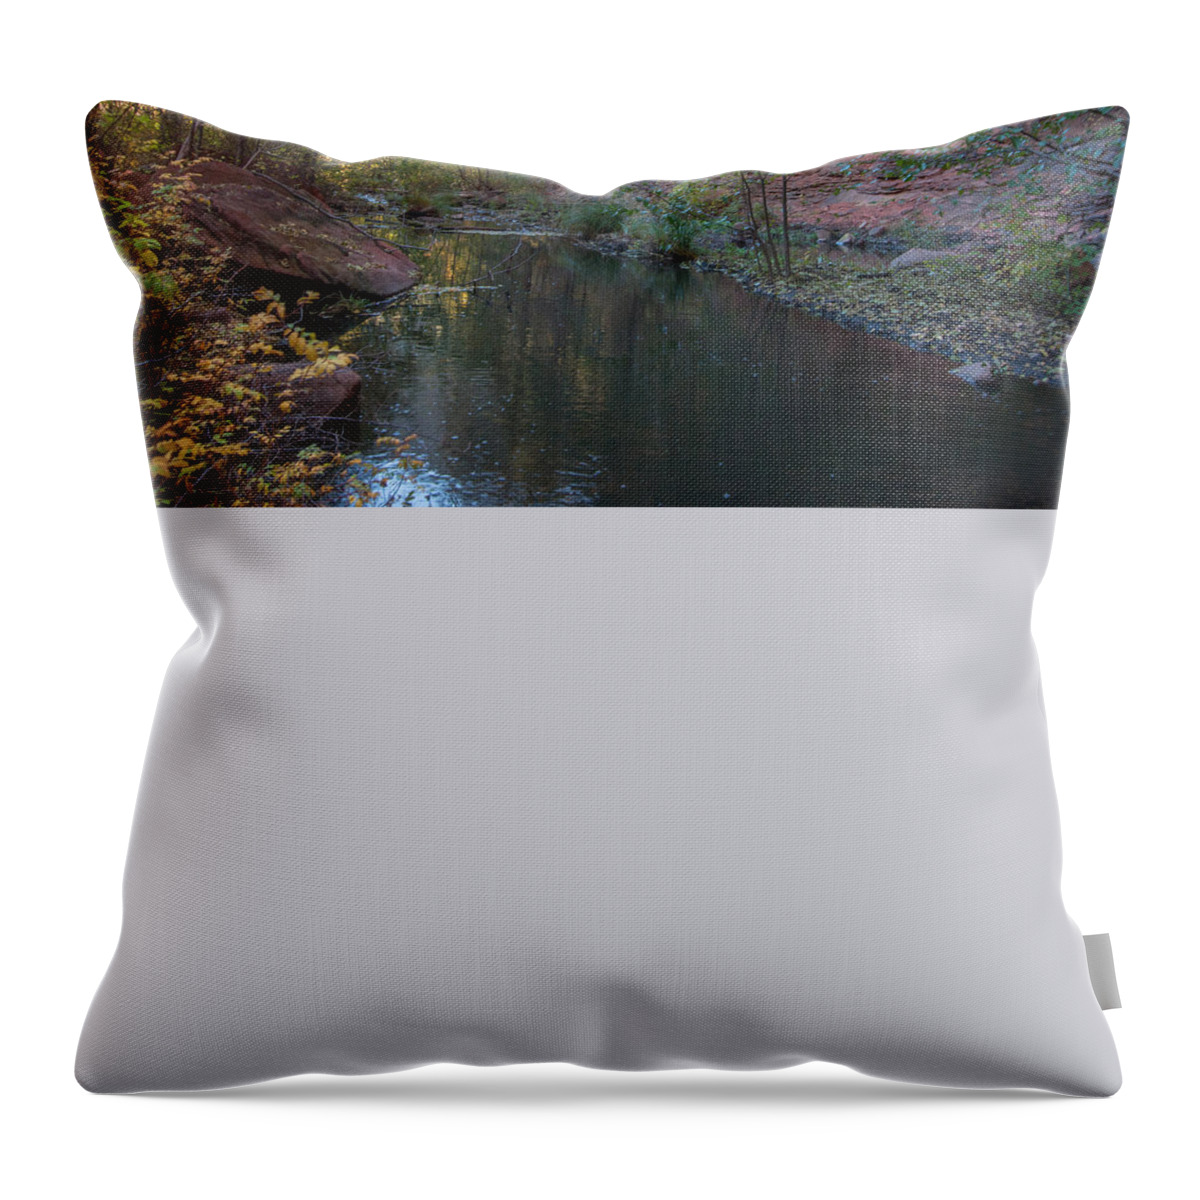 Snow Throw Pillow featuring the photograph West Fork #4 by Tam Ryan